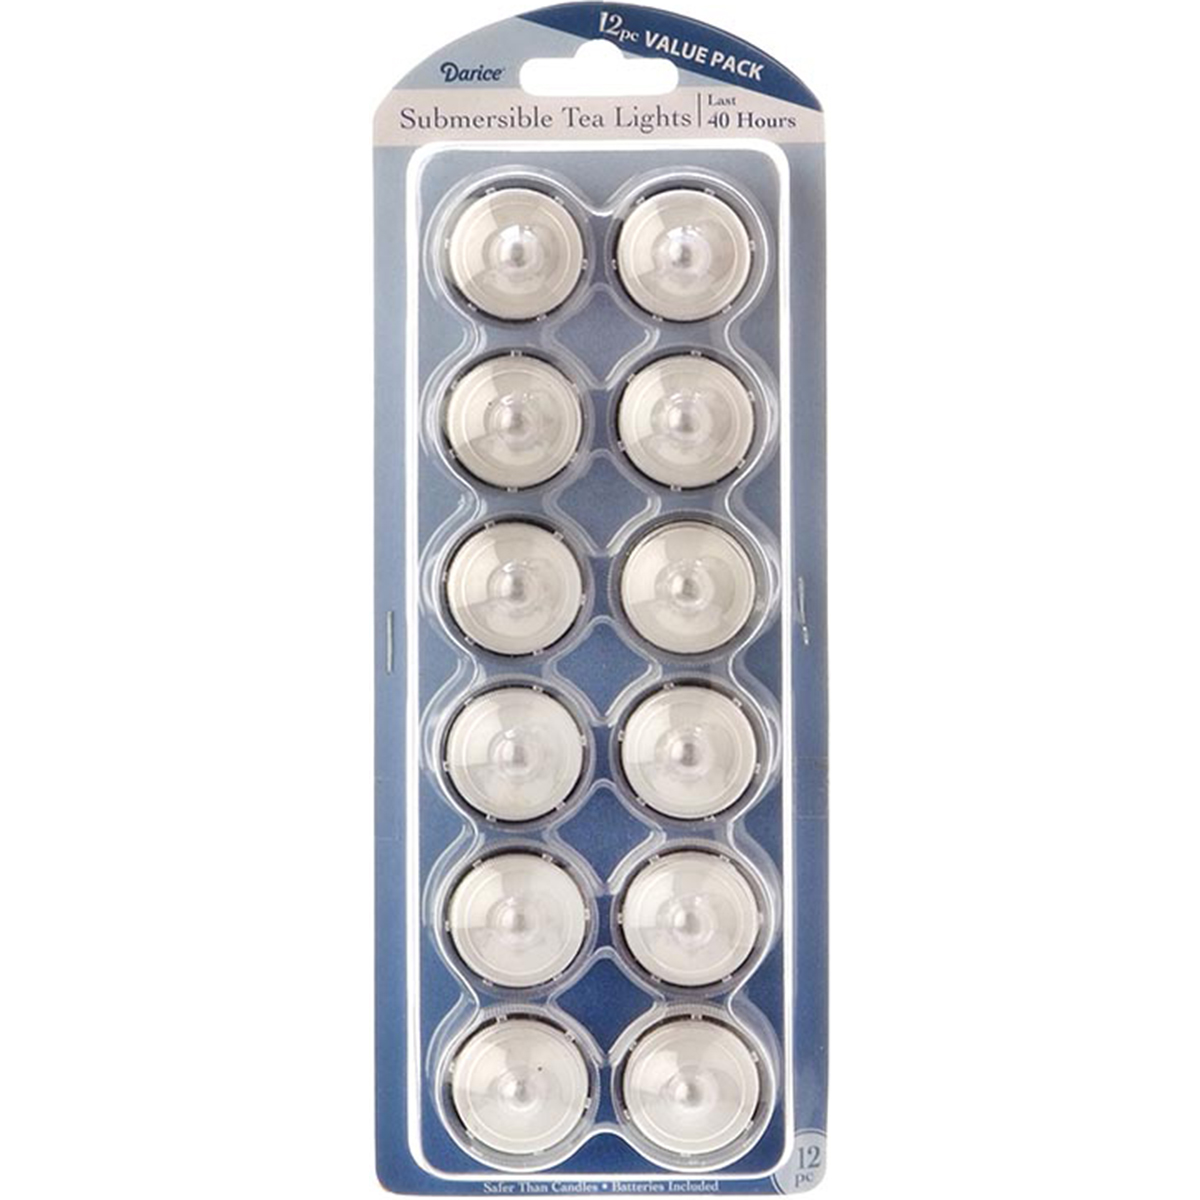 620549 Battery Operated Submersible Tea Lights, White - Pack Of 12